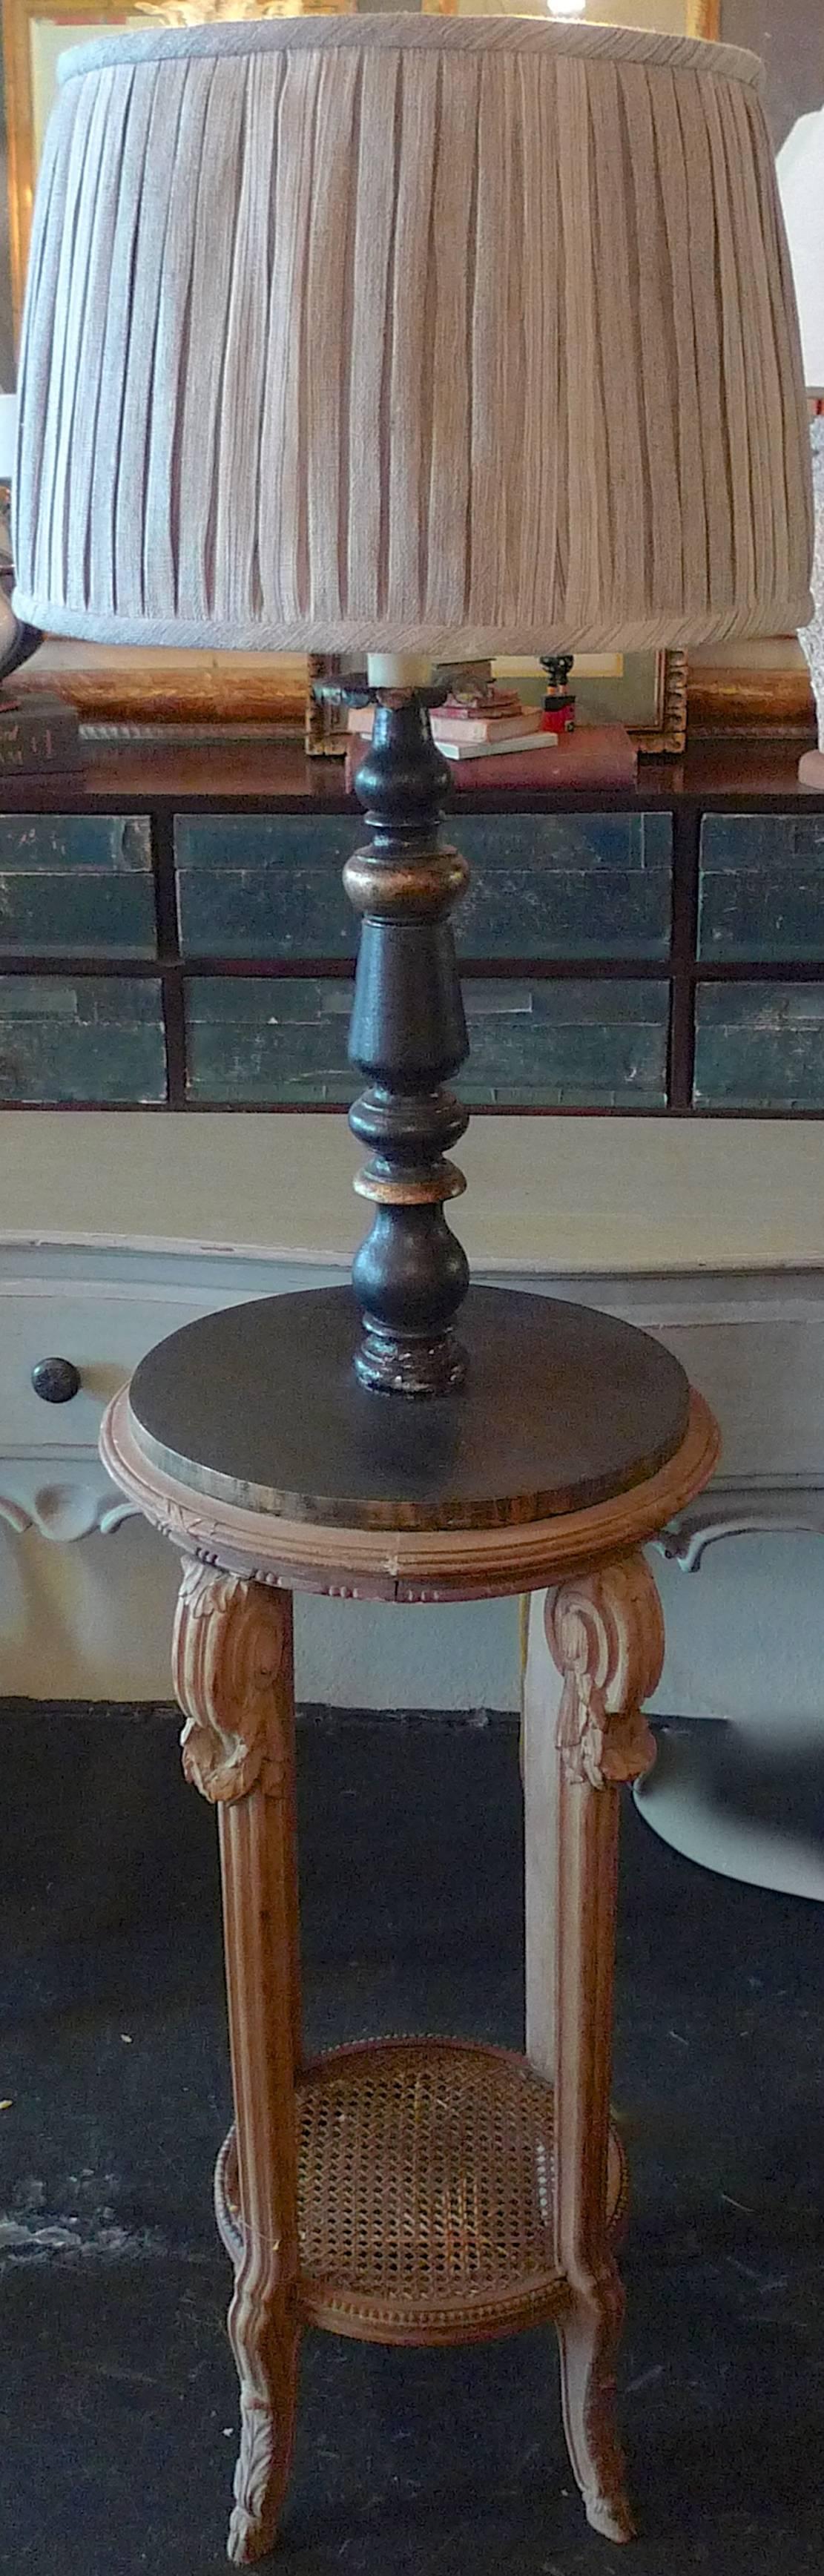 French 19th Century Floor Lamp on Hand Carved Pedestal with Bottom Wicker Shelf 2